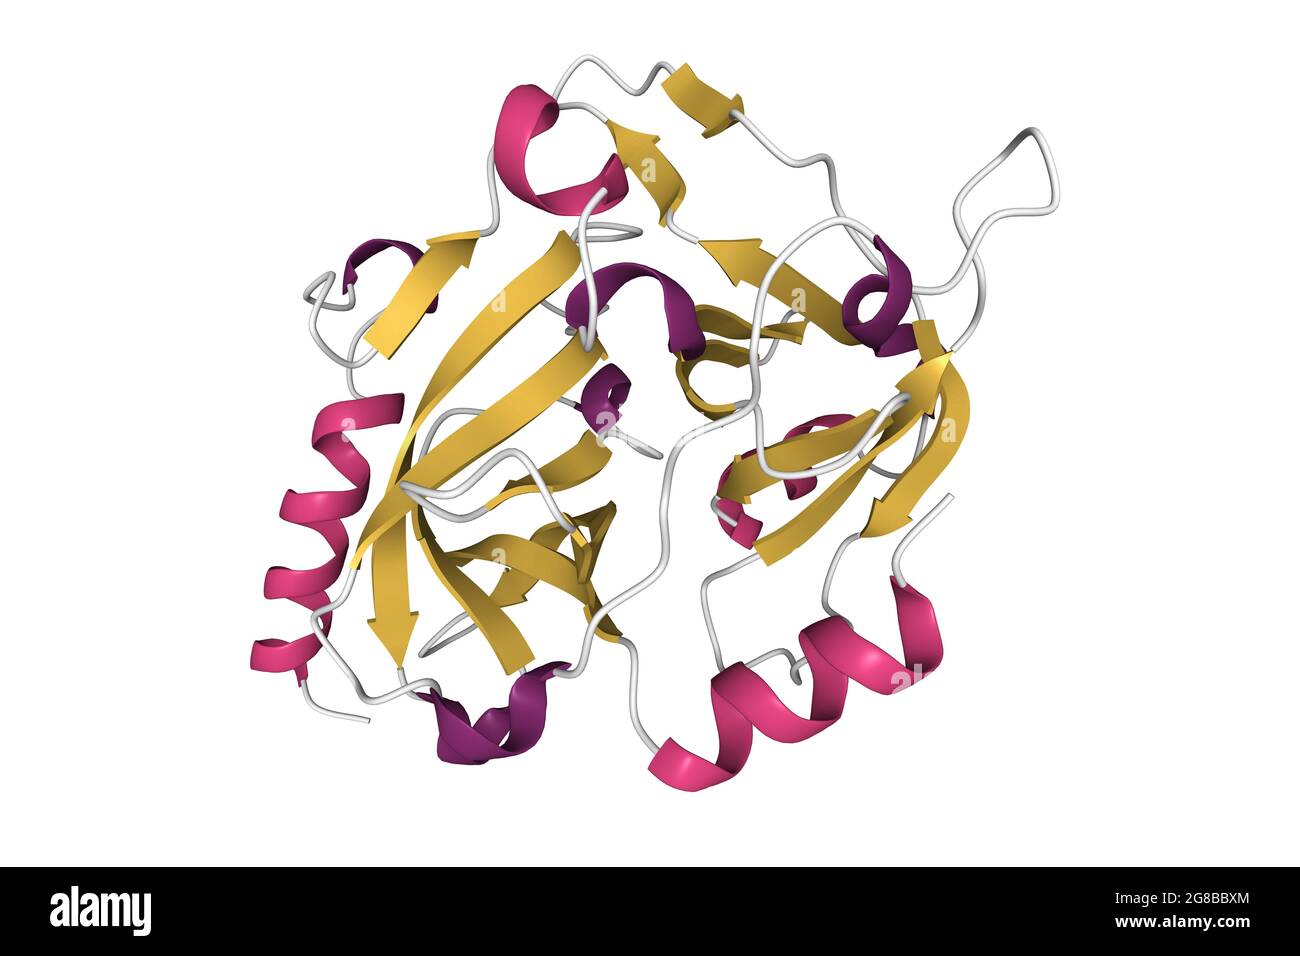 Structure of exfoliative toxin A from Staphylococcus aureus, 3D cartoon model, secondary structure color scheme,based on PDB 1exf, white background Stock Photo